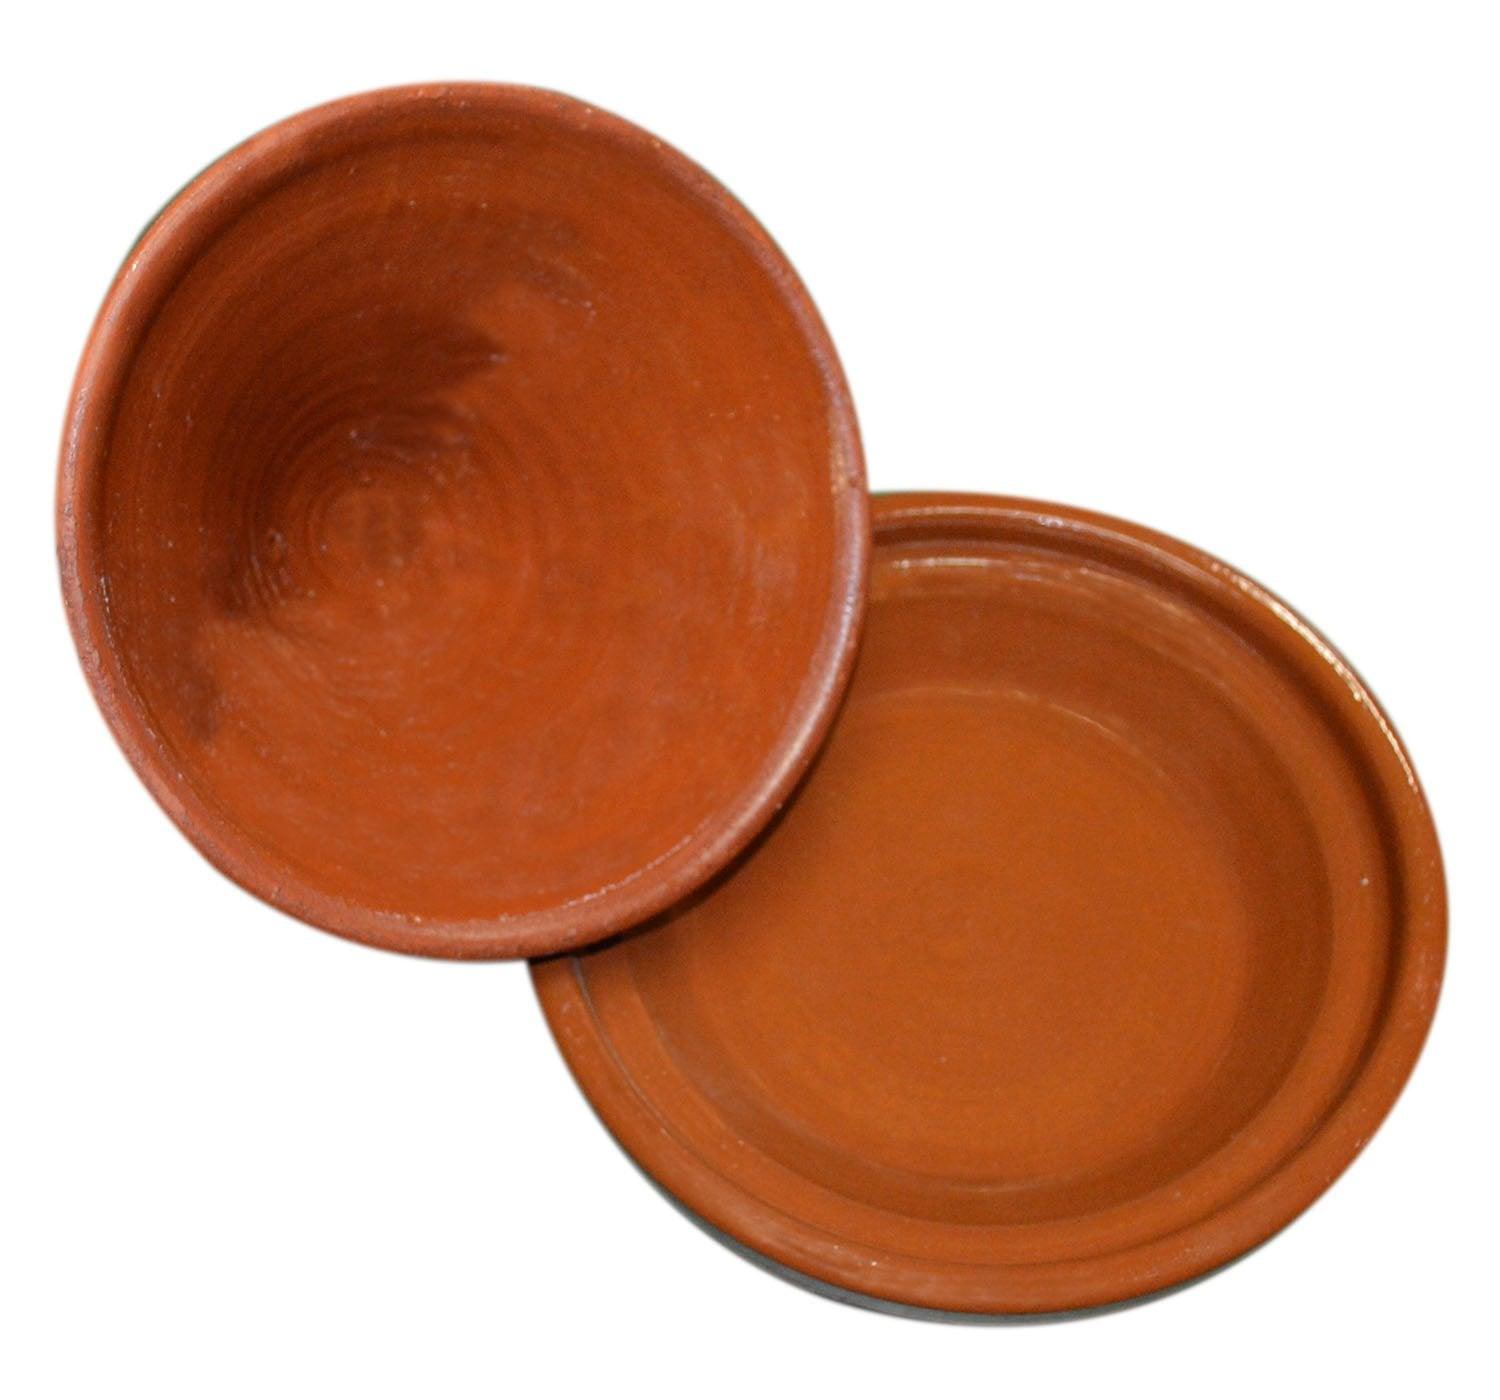 Moroccan small cooking tagine handmade glazed 8 inches in diameter - CookCave